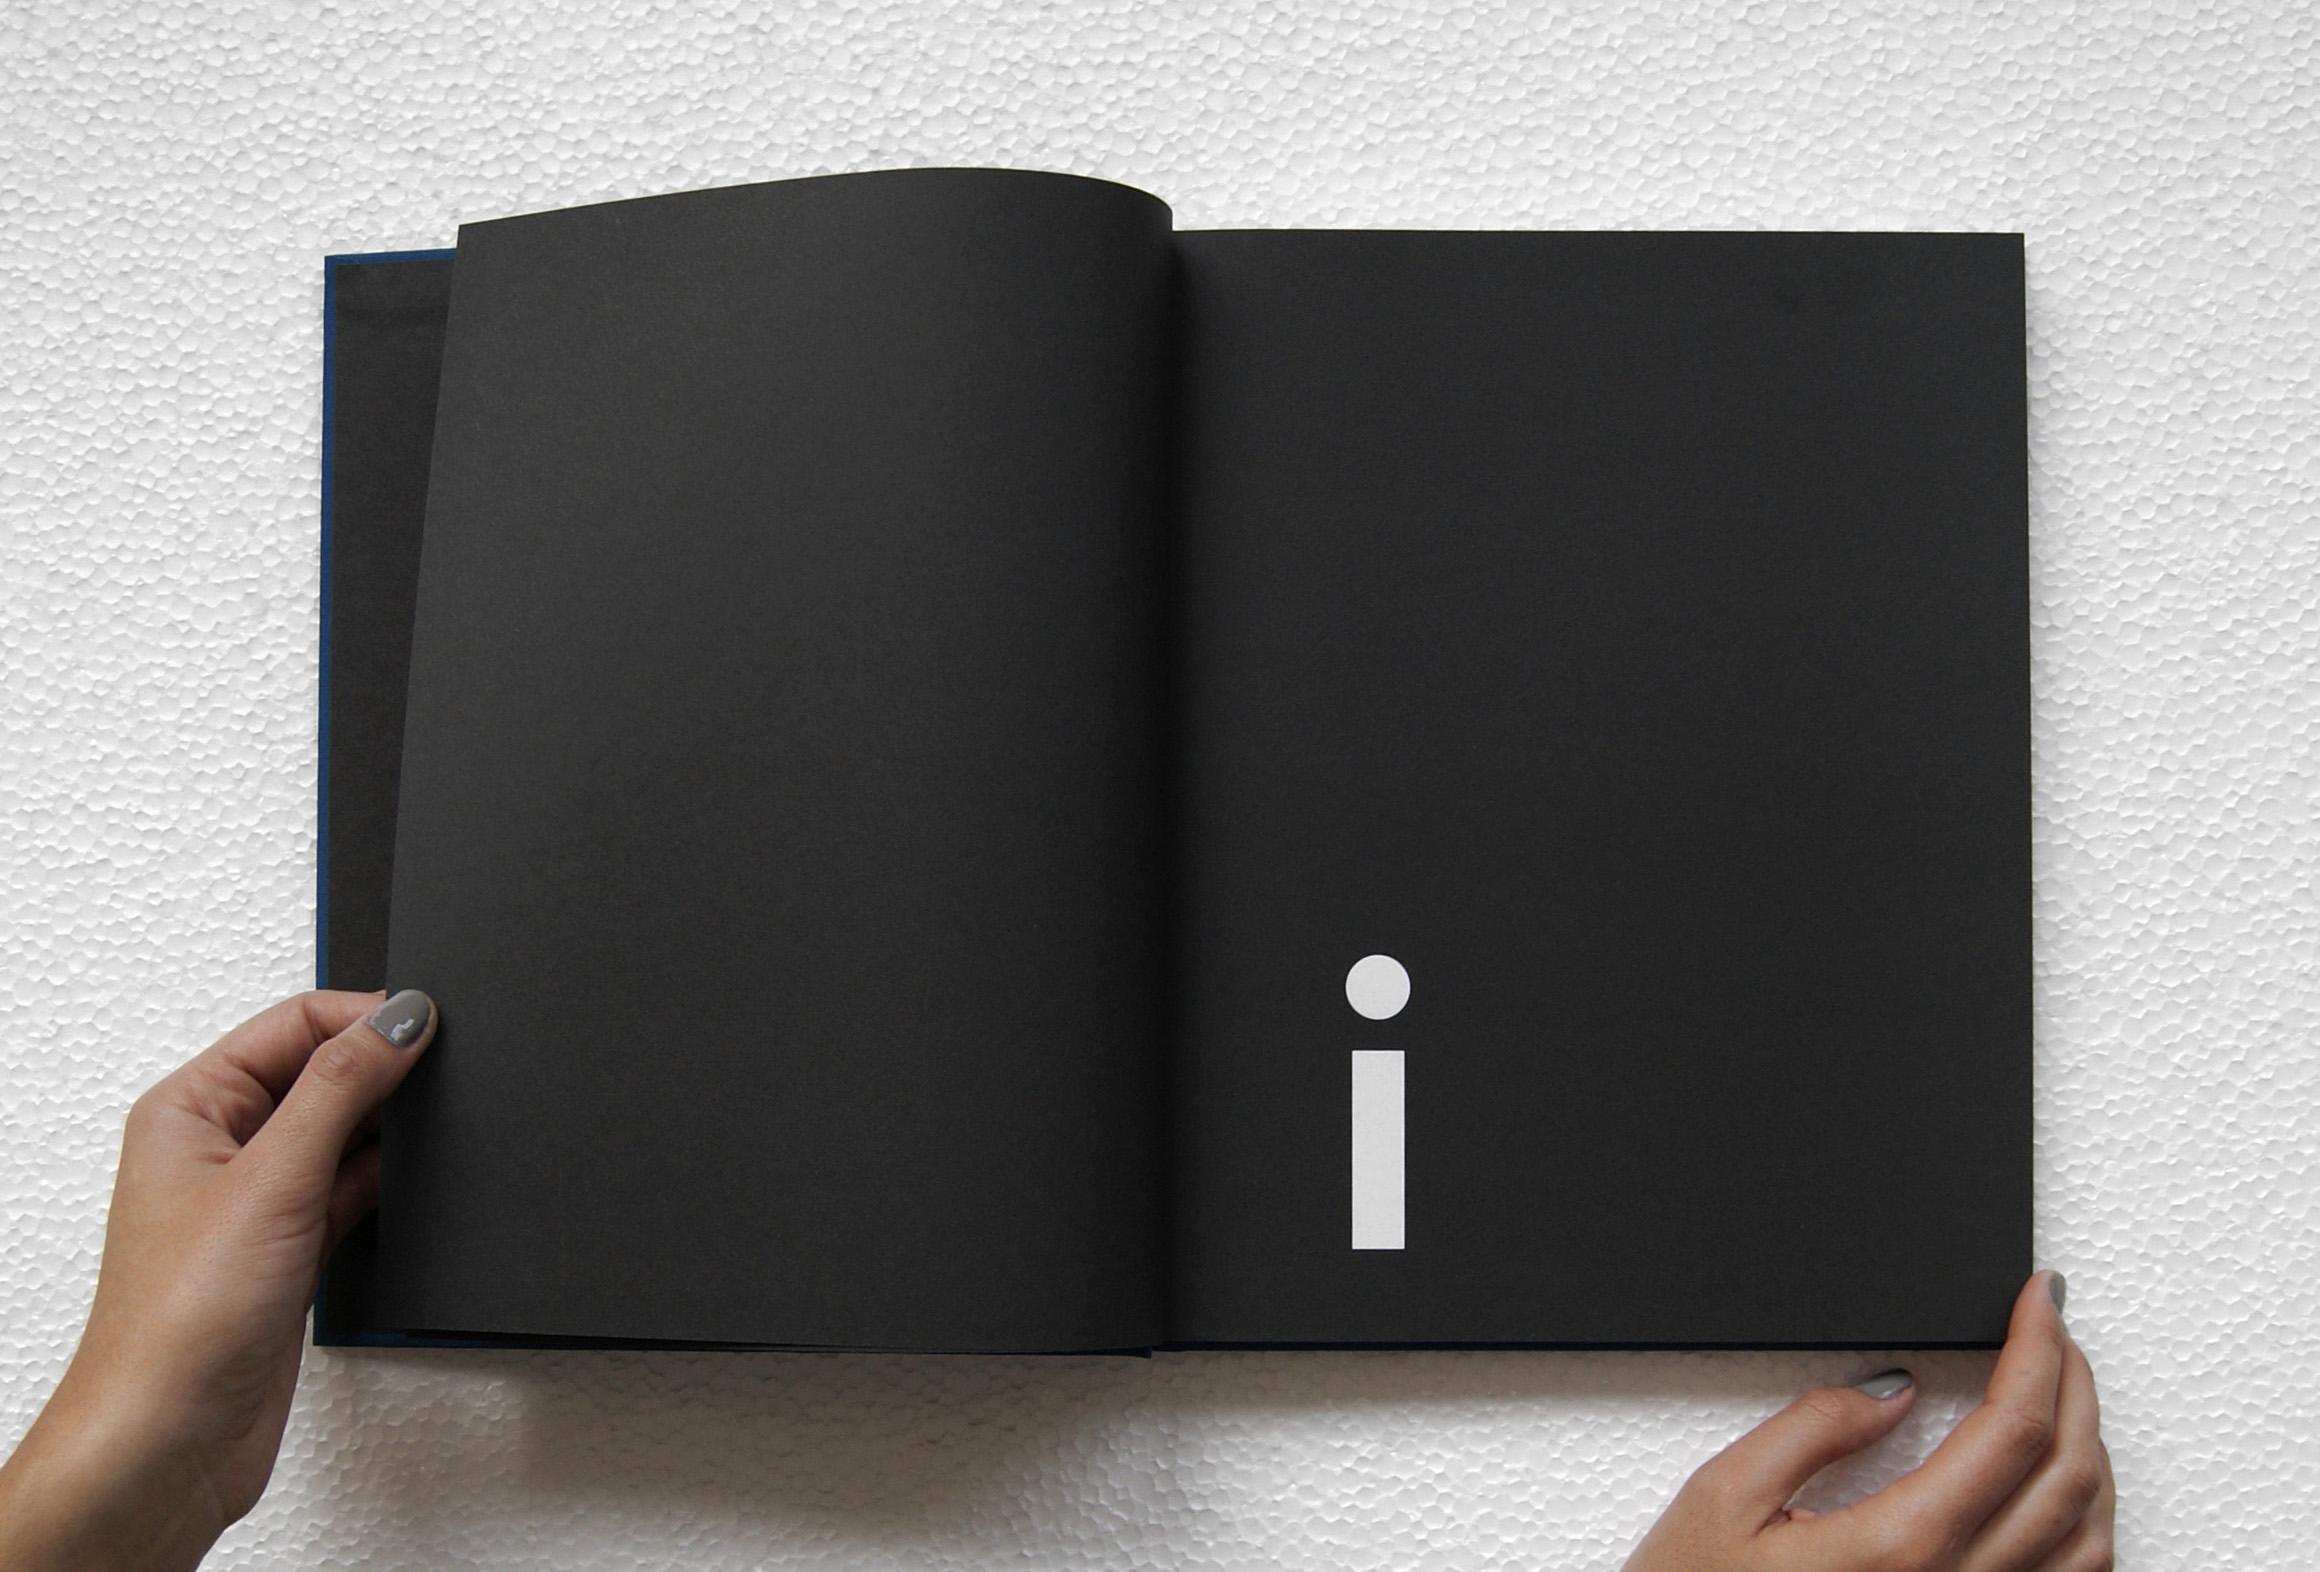 <p>2O14
<br>QUIZ / Based on an idea by Robert Stadler
<br>Exhibition catalogue edited by Robert Stadler and Alexis Vaillant</p>
